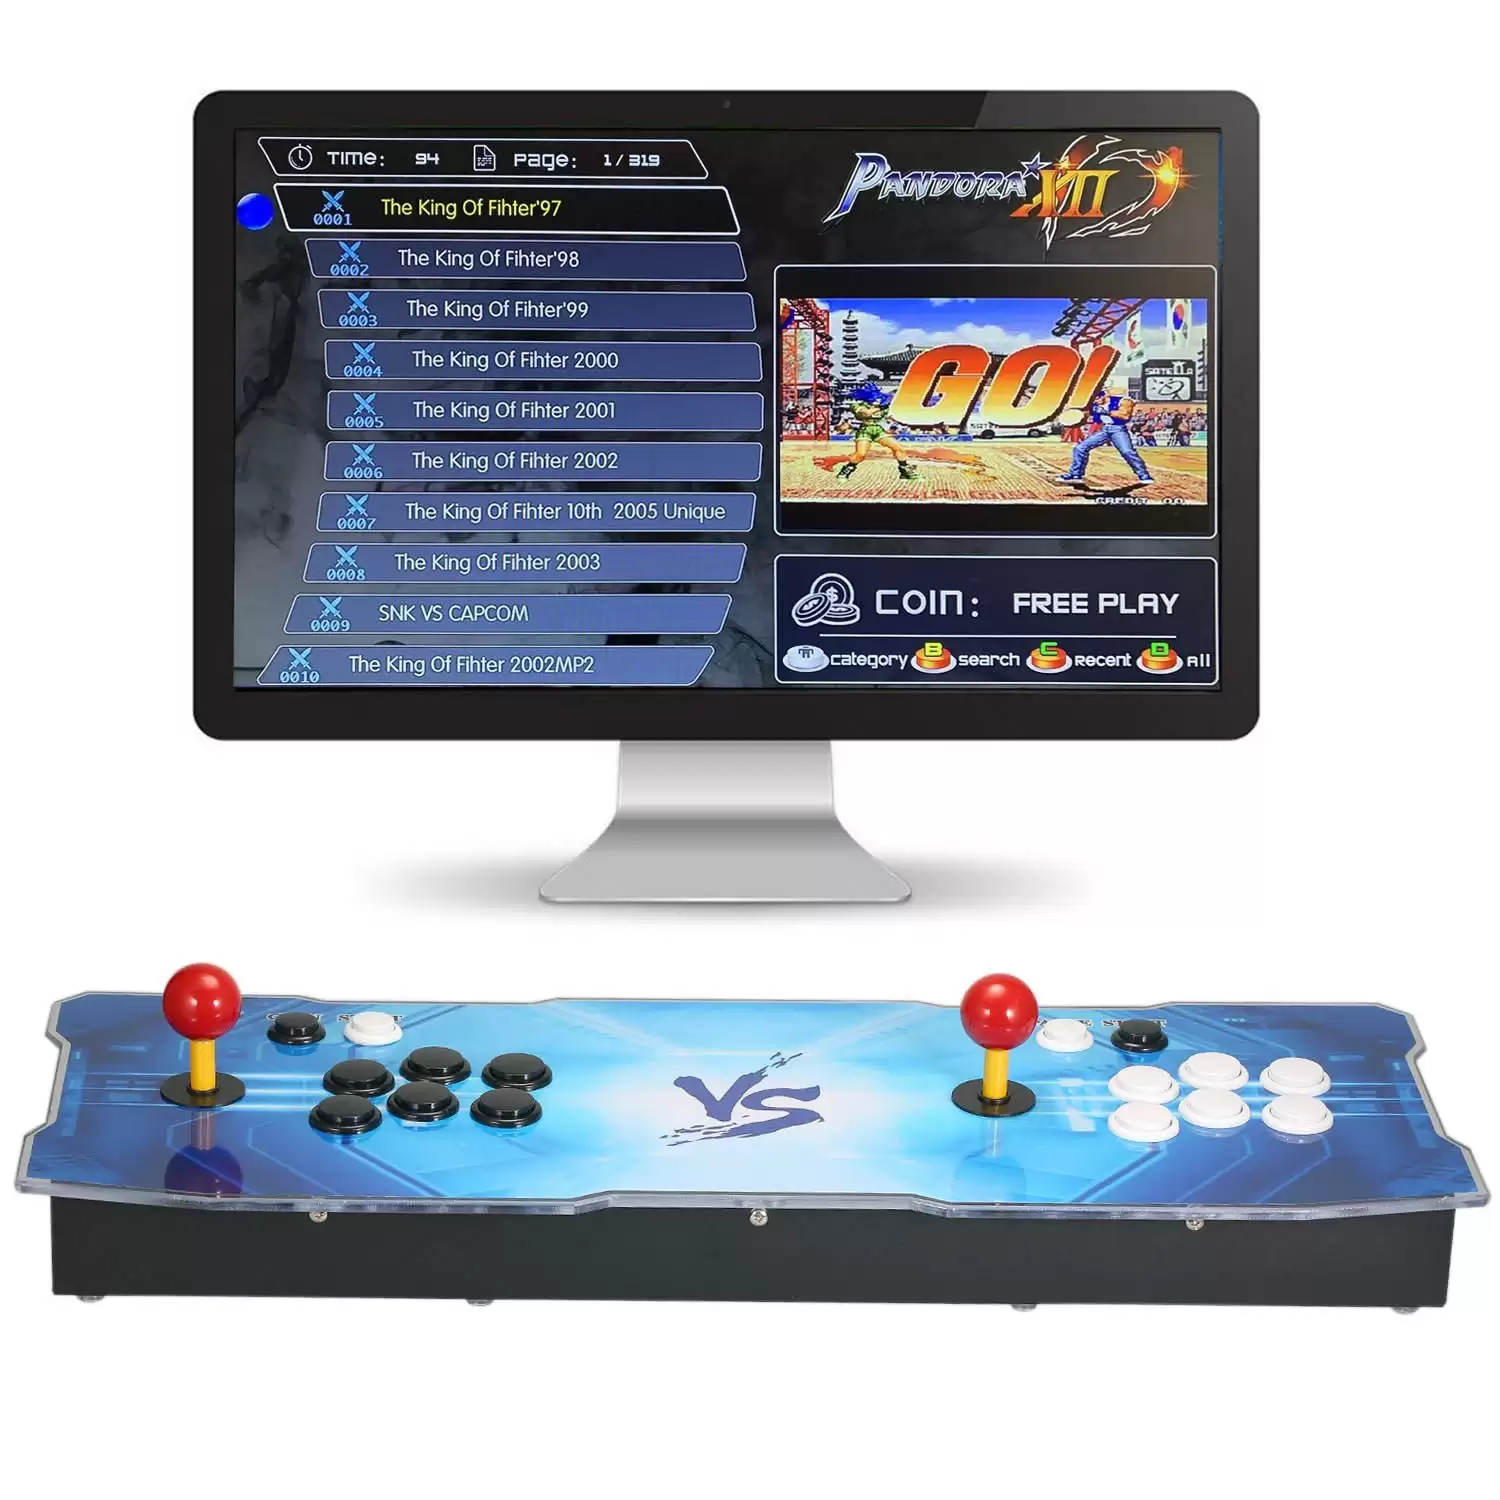 Get Extra $111 Discount On Arcade Console Integrated 3188 In 1 Arcade Games Station Machine + Free Shipping $119.99 With This Discount Coupon At Tomtop